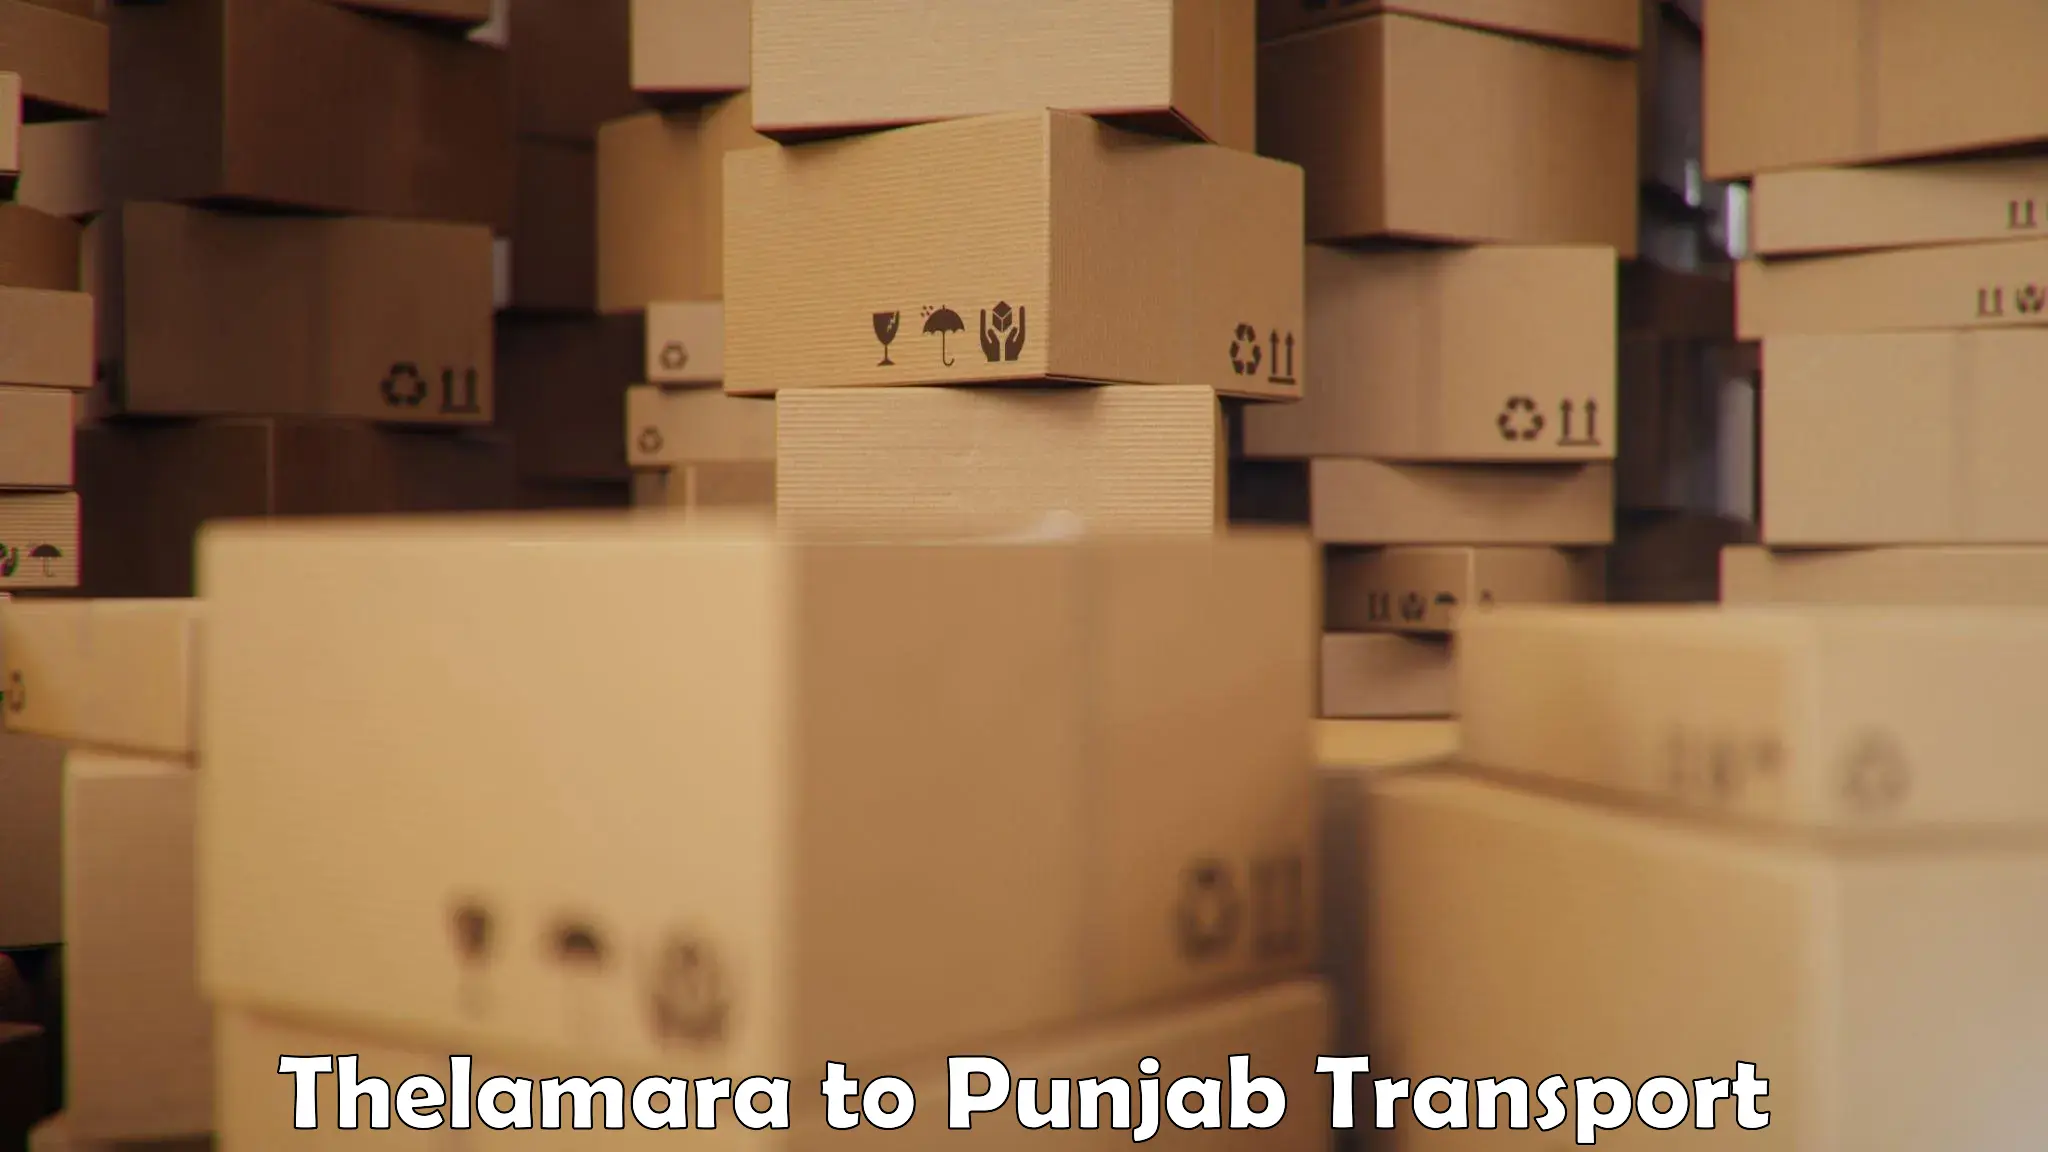 Online transport service Thelamara to Mohali